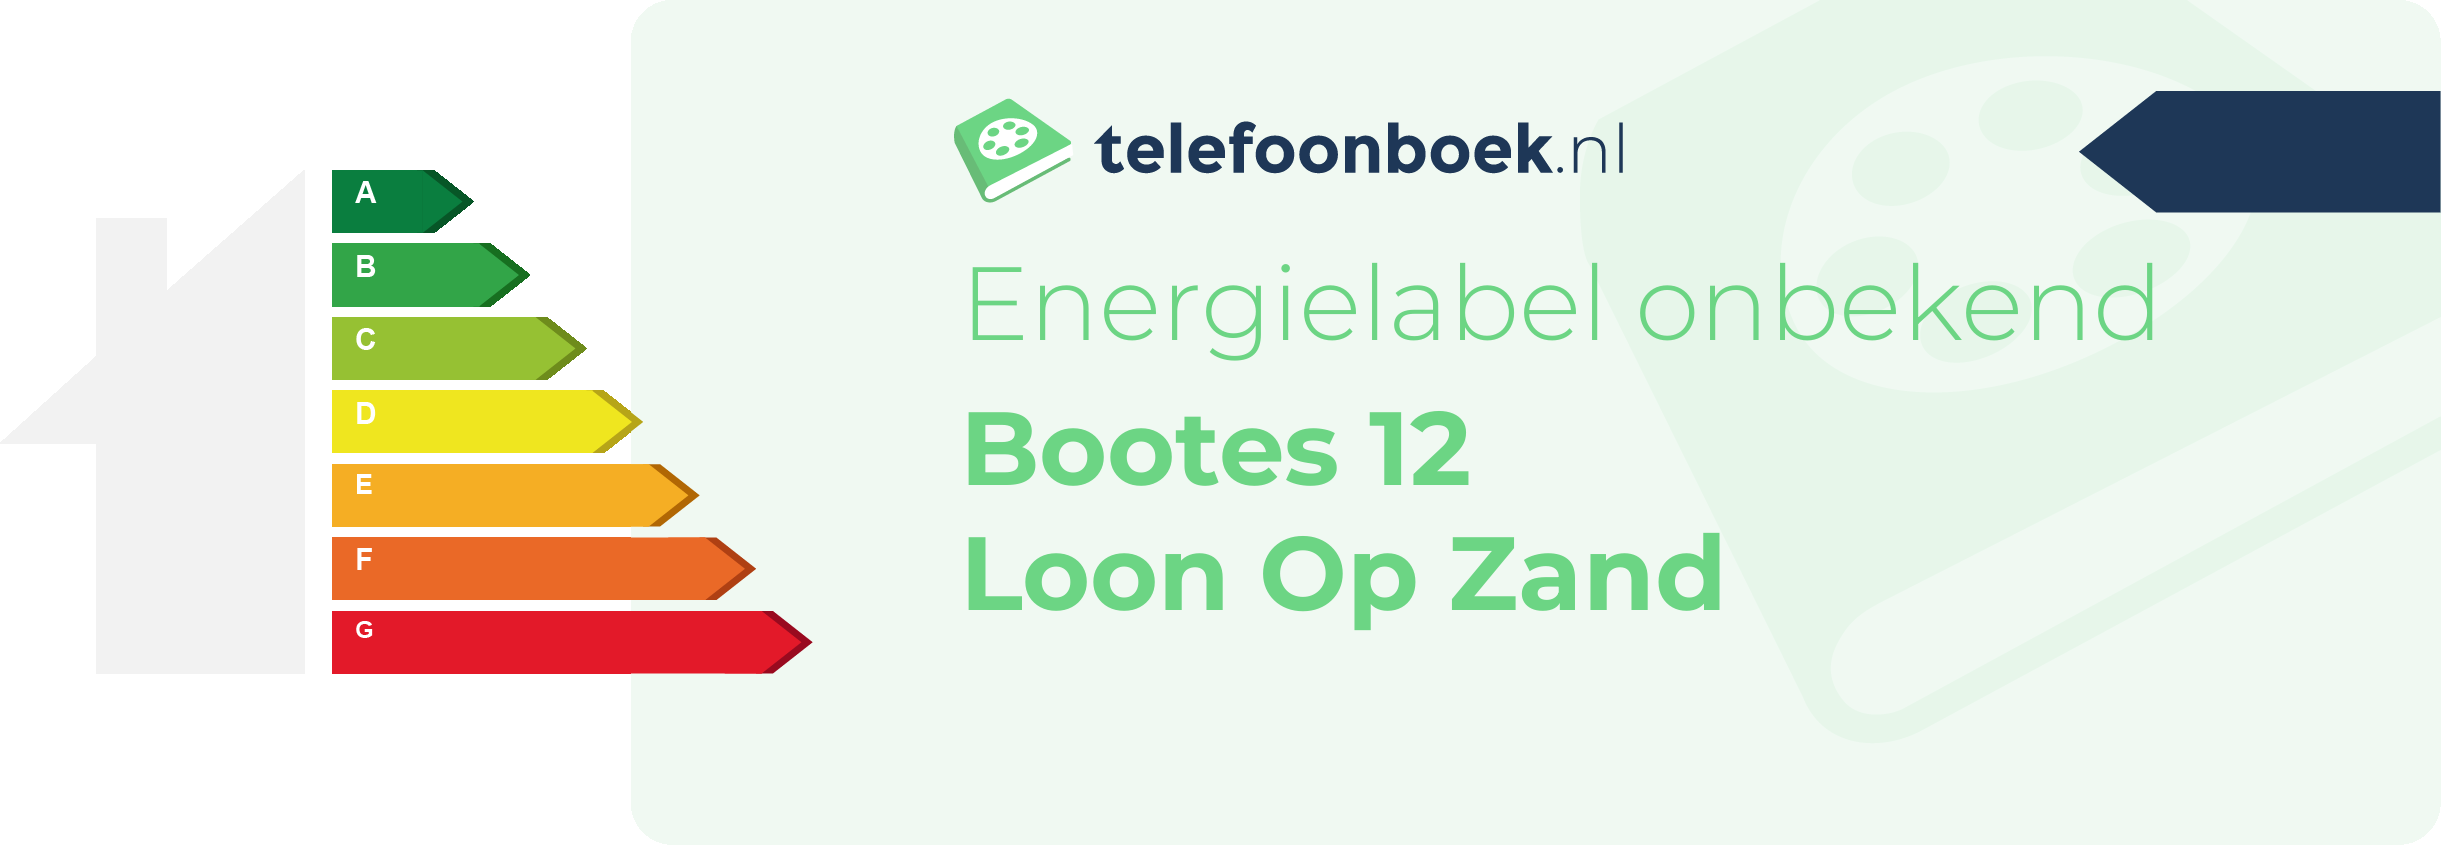 Energielabel Bootes 12 Loon Op Zand